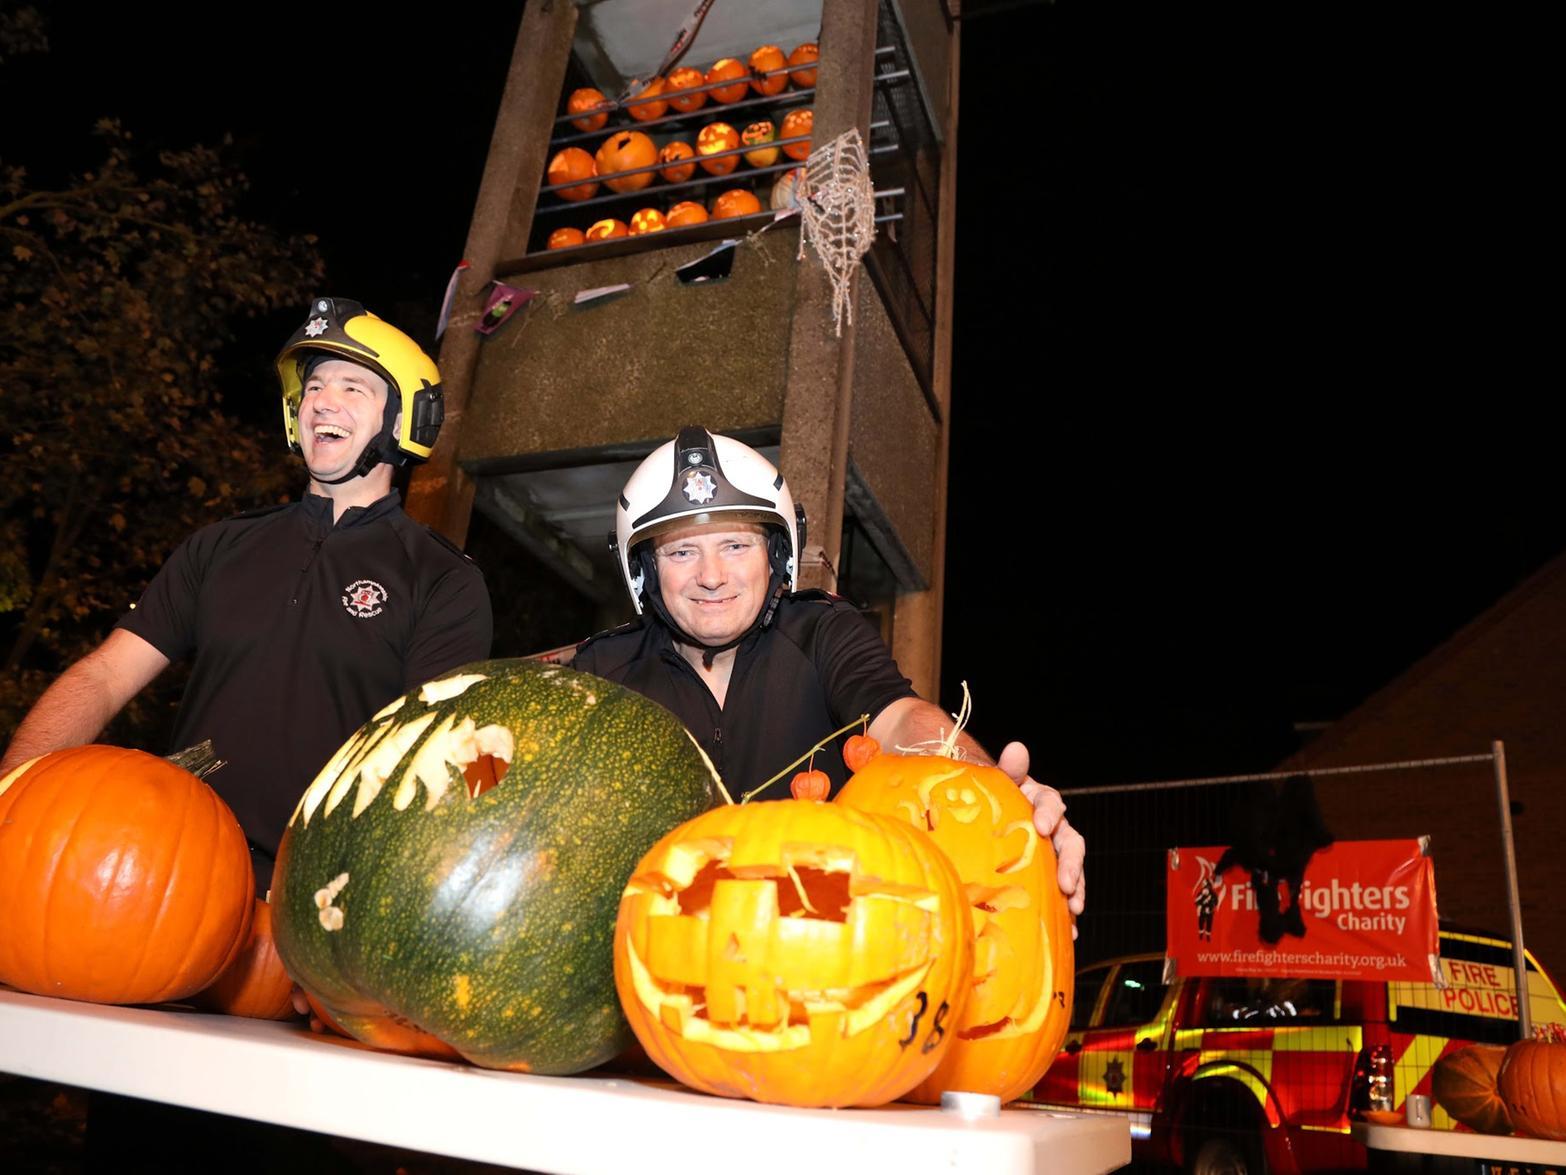 The event takes place on the weekend closest to Halloween. Watch manager Lee Allen assessed the pumpkins.